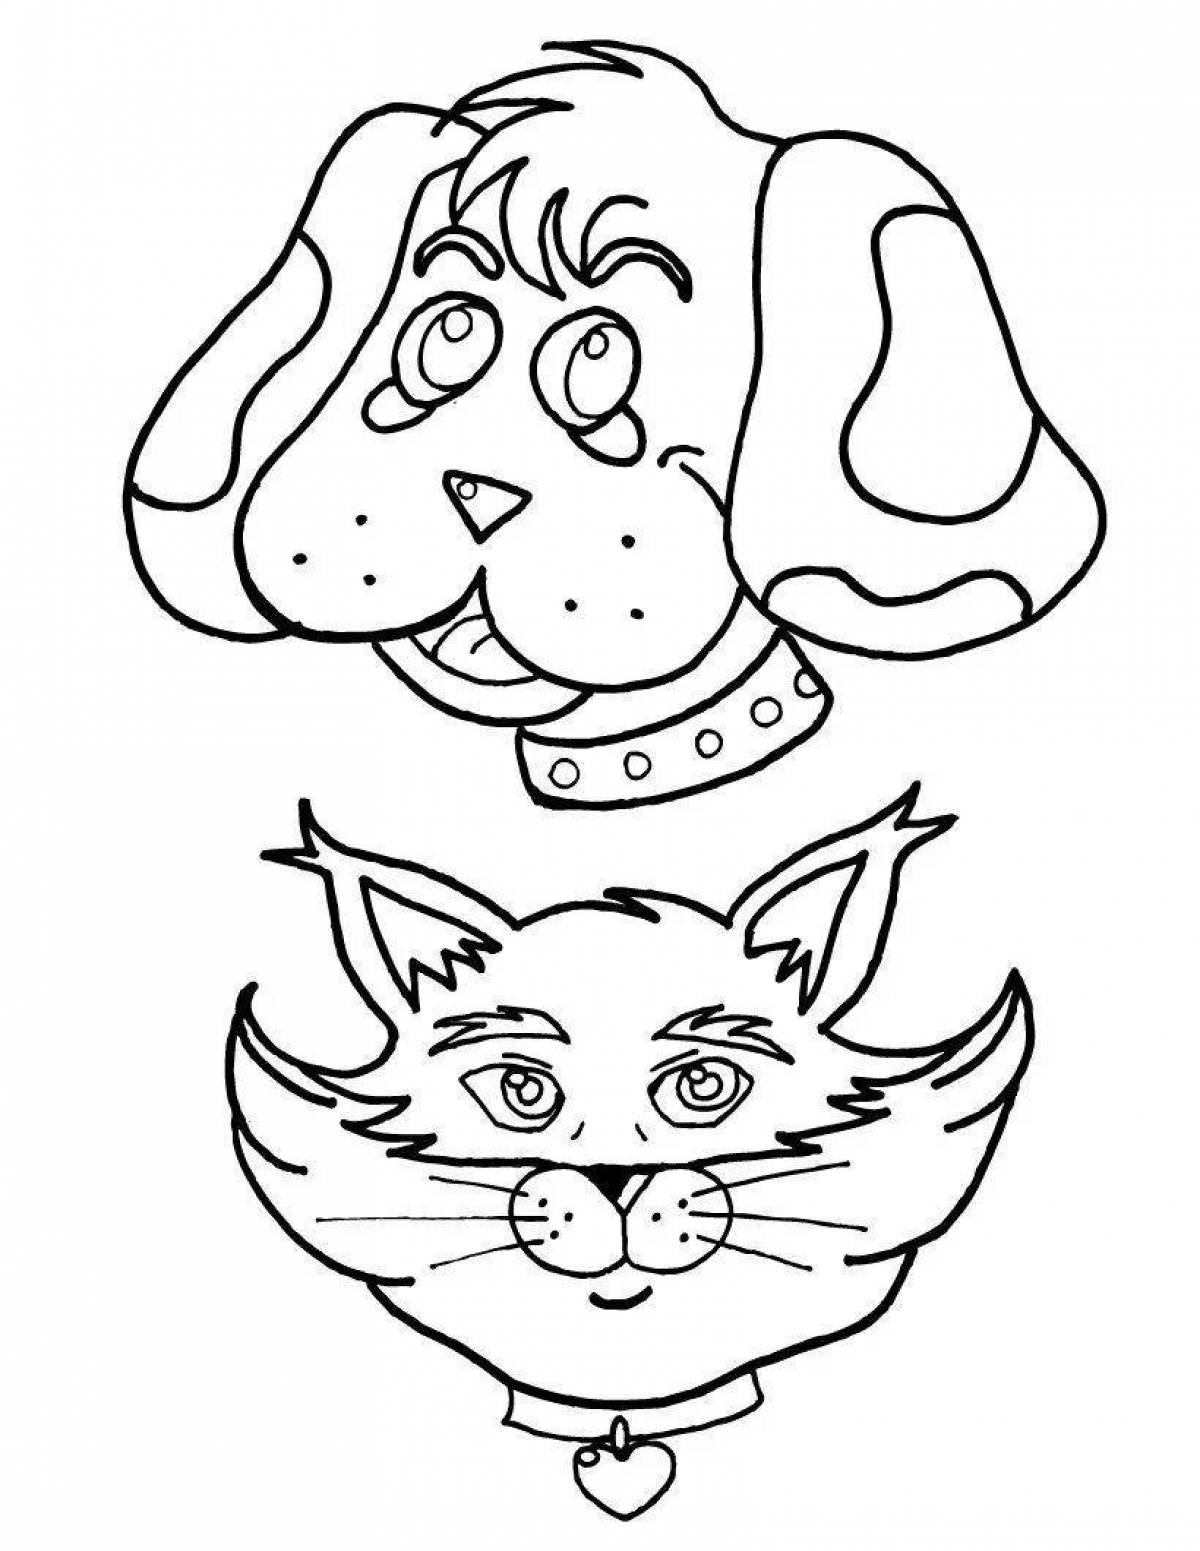 Animated cat and dog coloring pages for kids